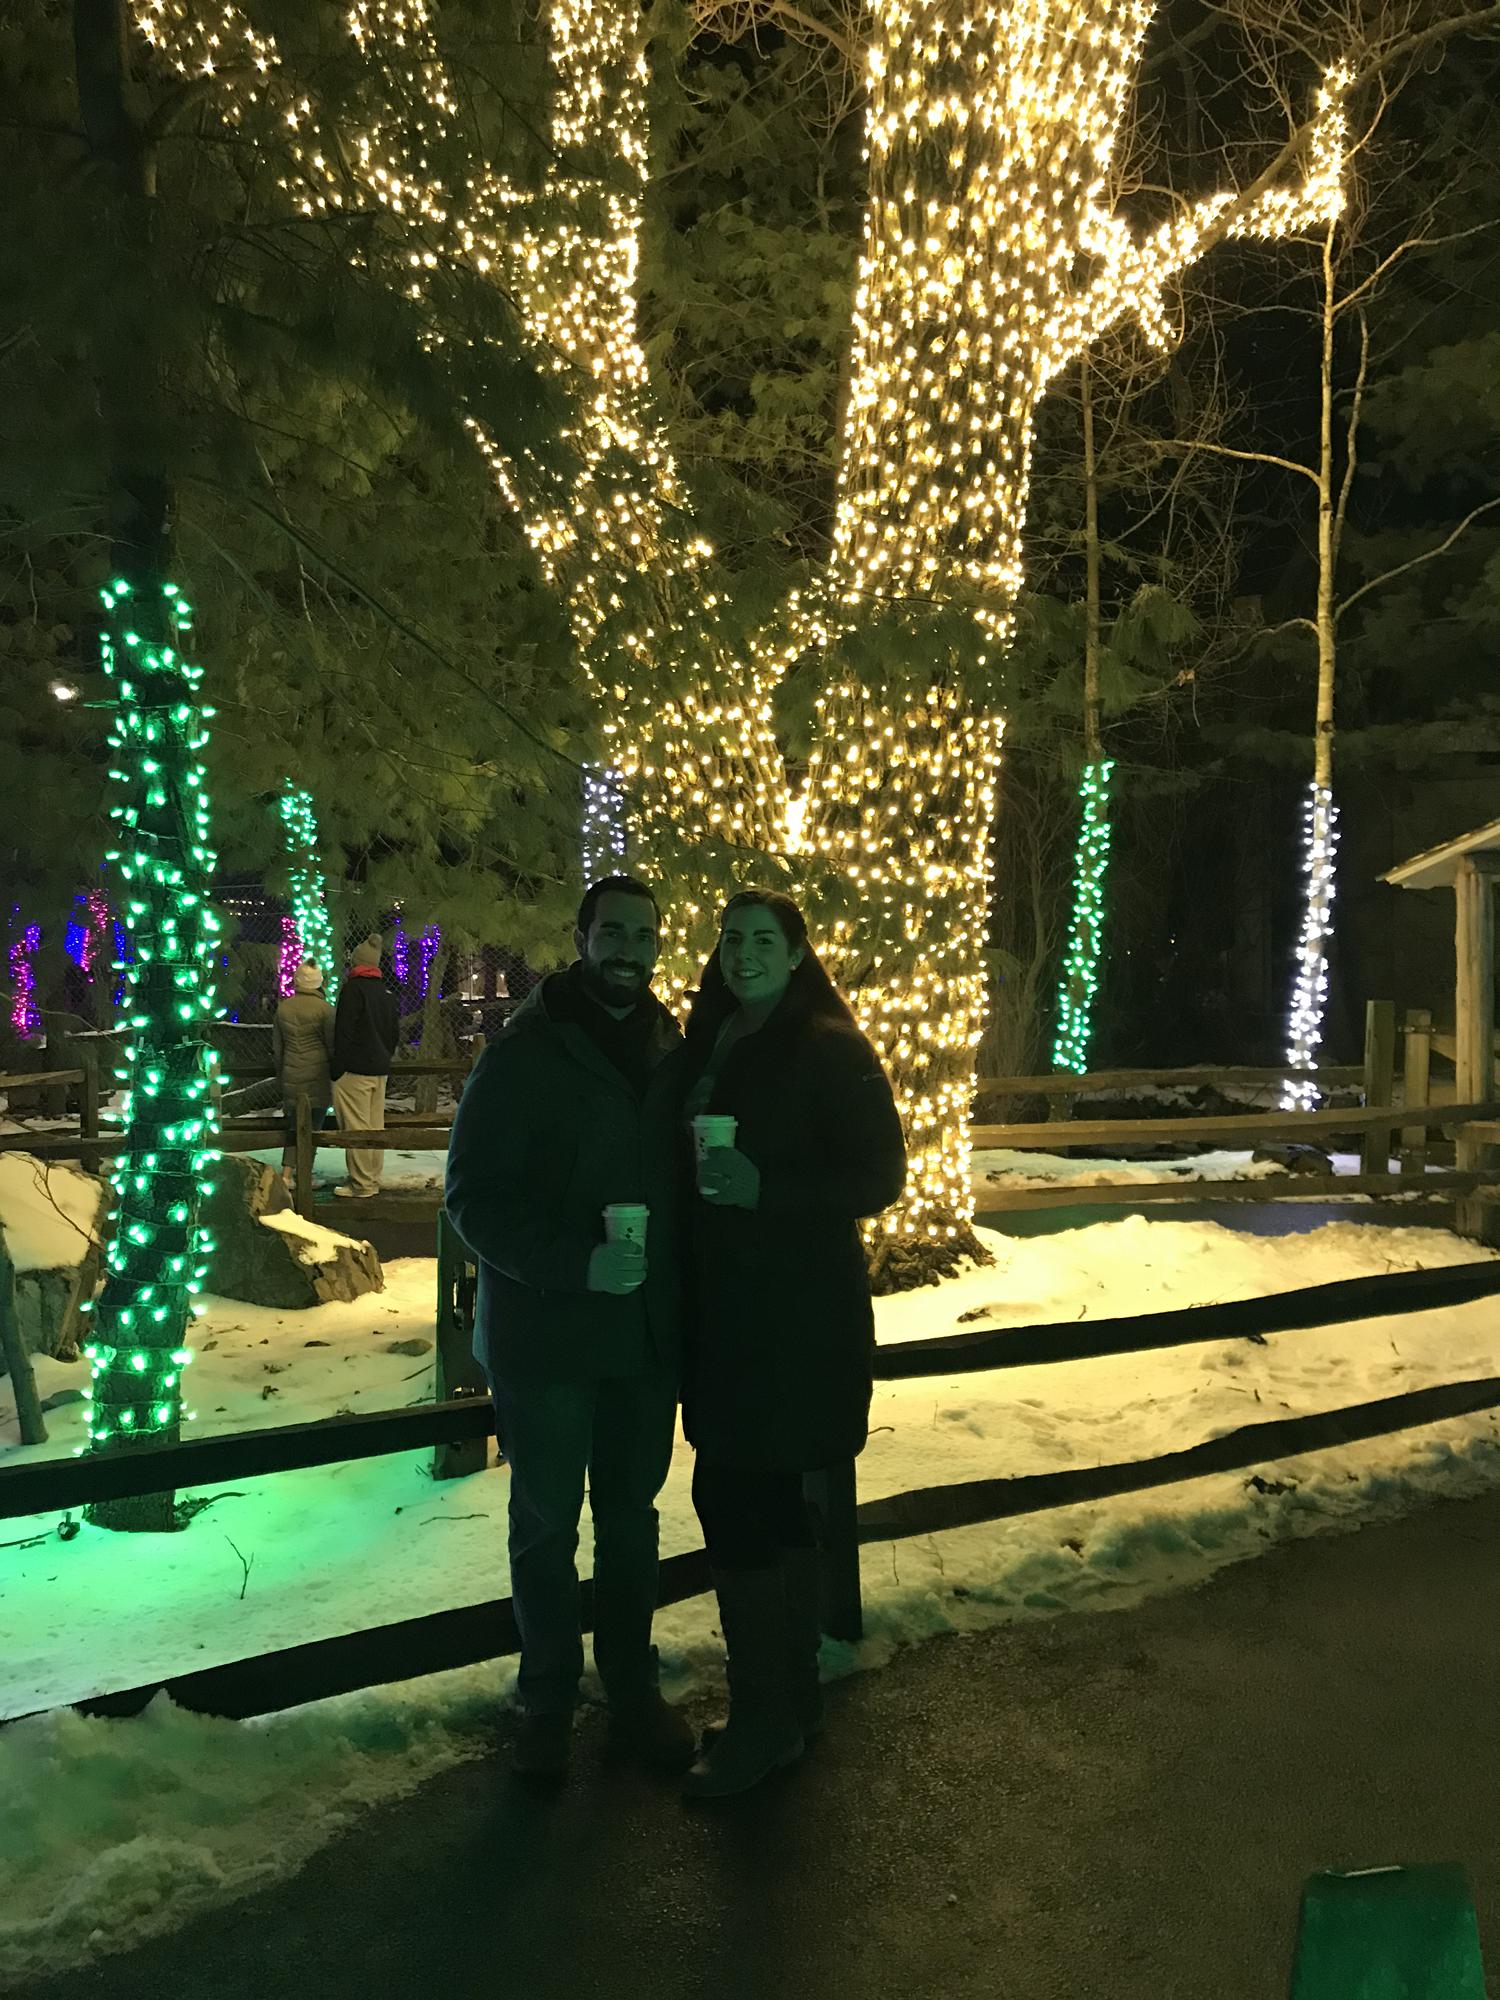 One of our first dates, Zoo lights at Stone zoo!